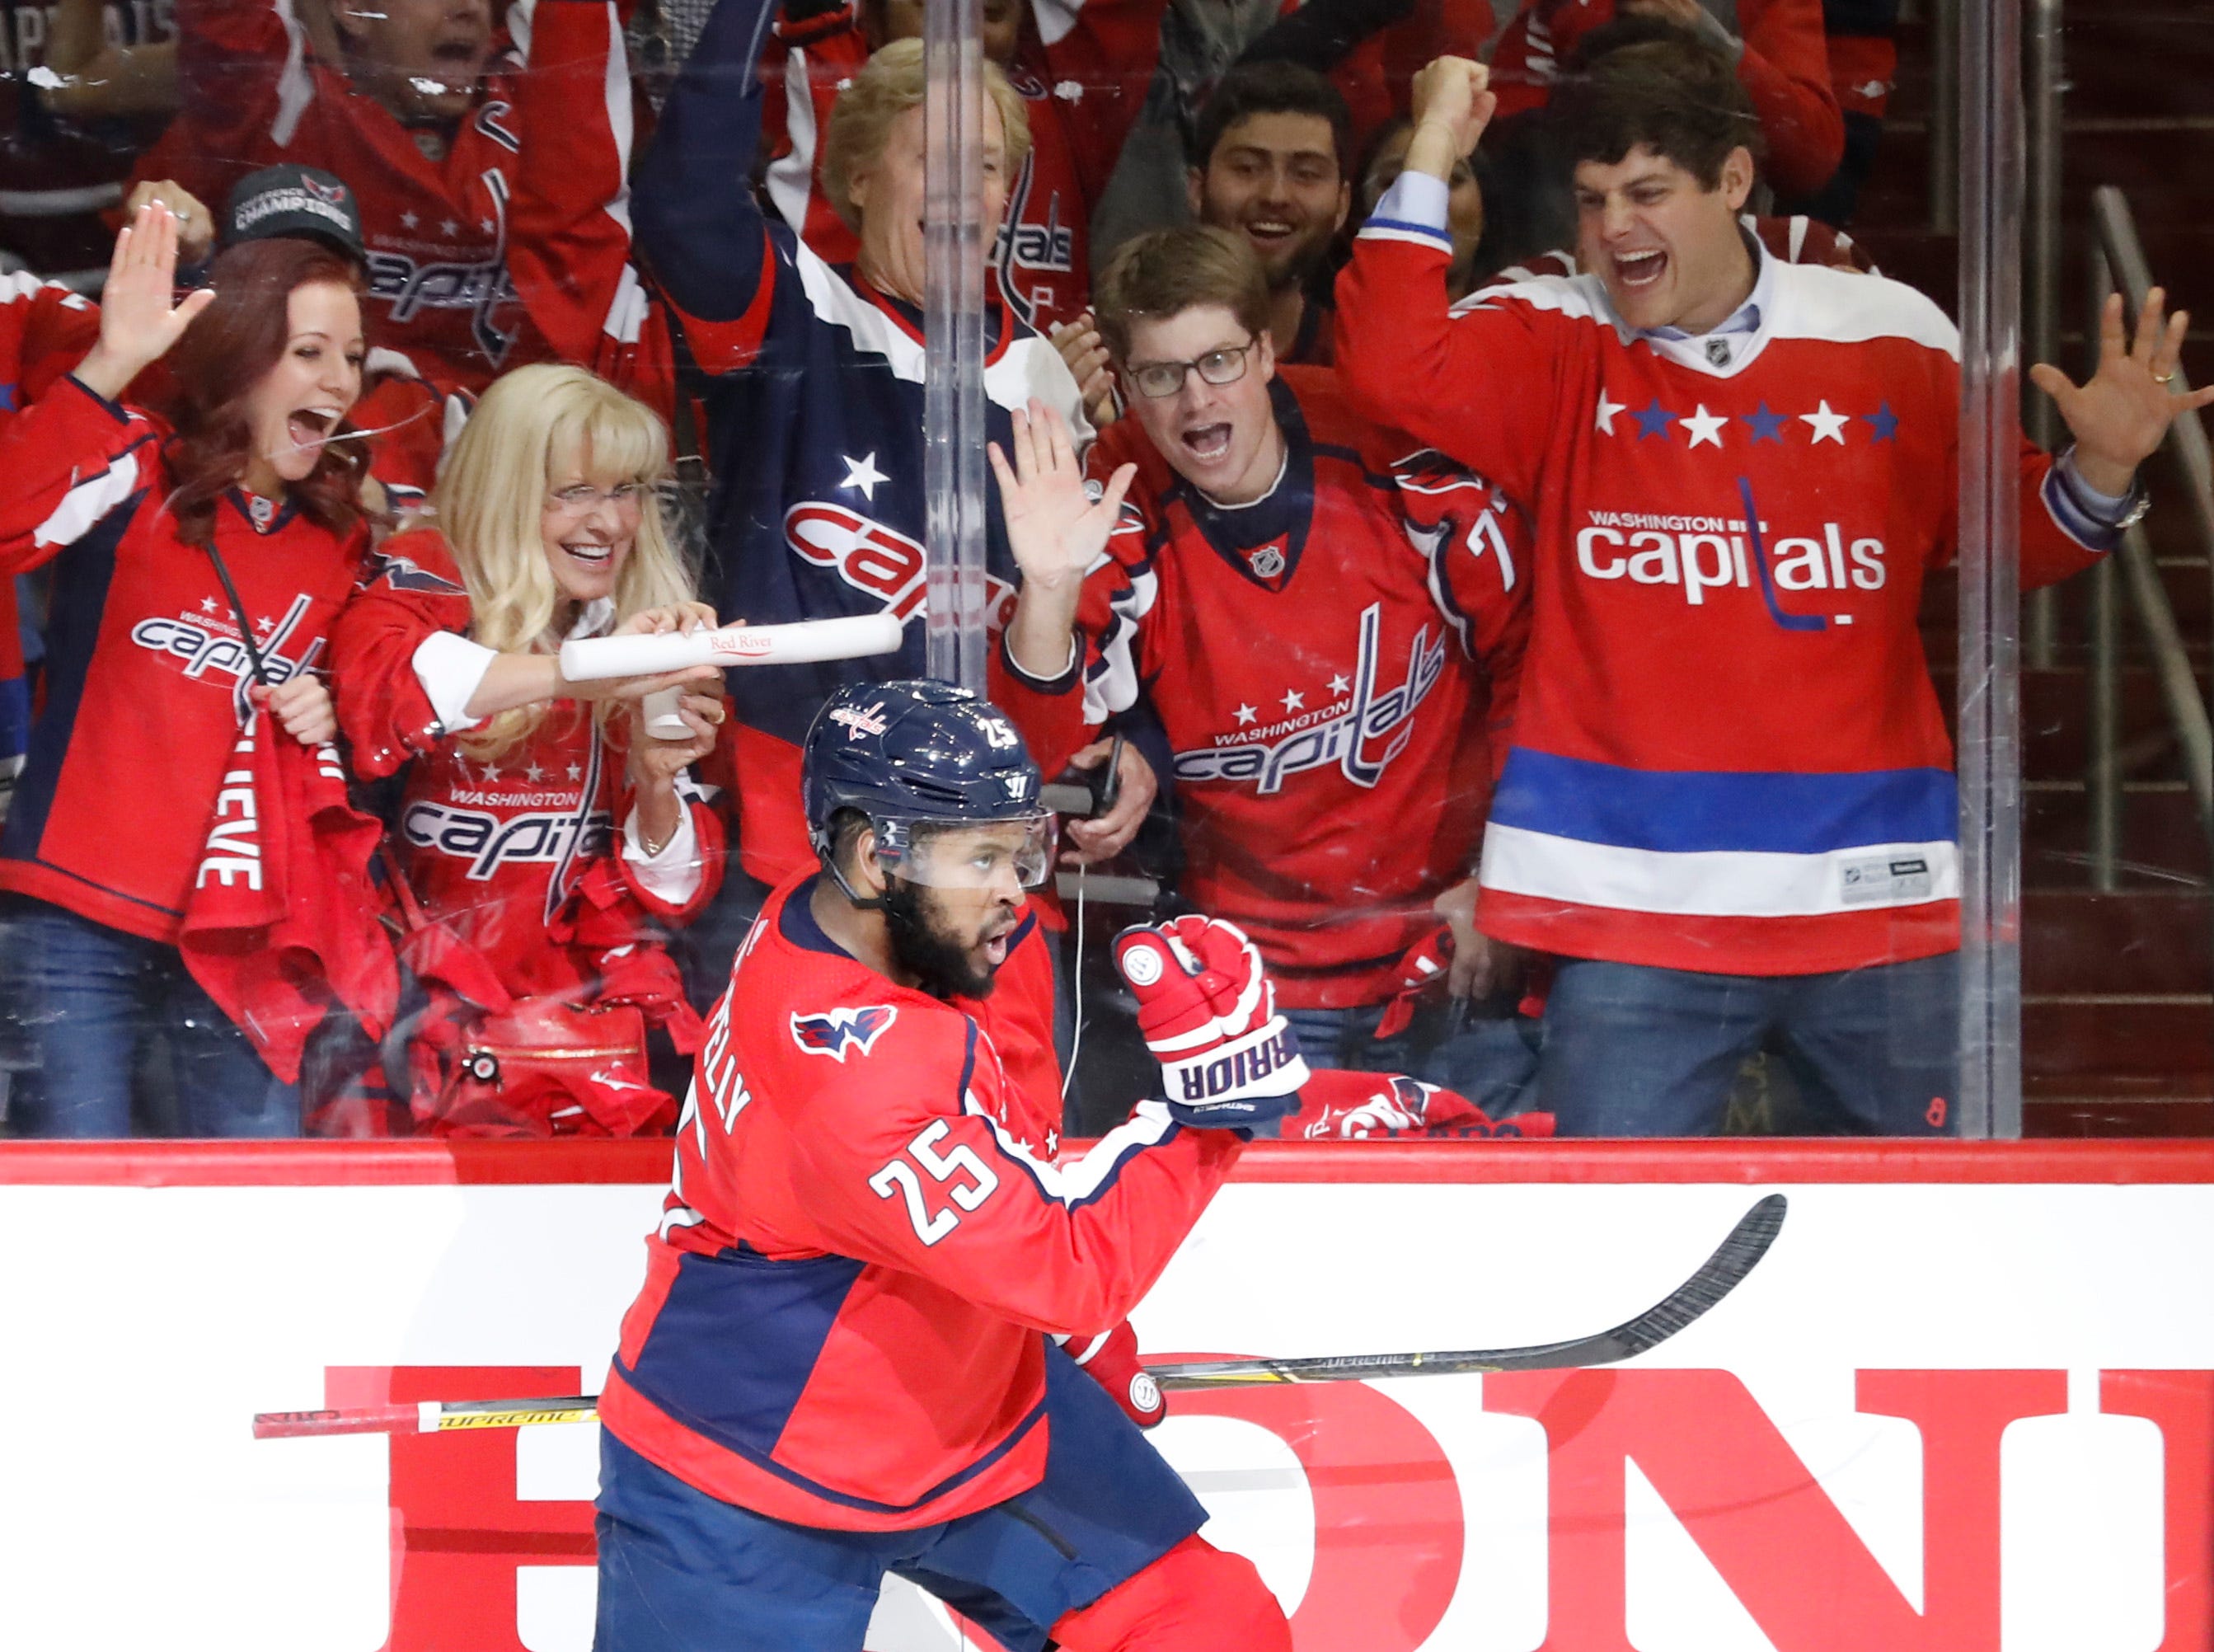 Washington Capitals right wing Devante Smith-Pelly celebrates after scoring a goal against the Vegas Golden Knights in the first period in game four of the 2018 Stanley Cup Final at Capital One Arena in Washington.